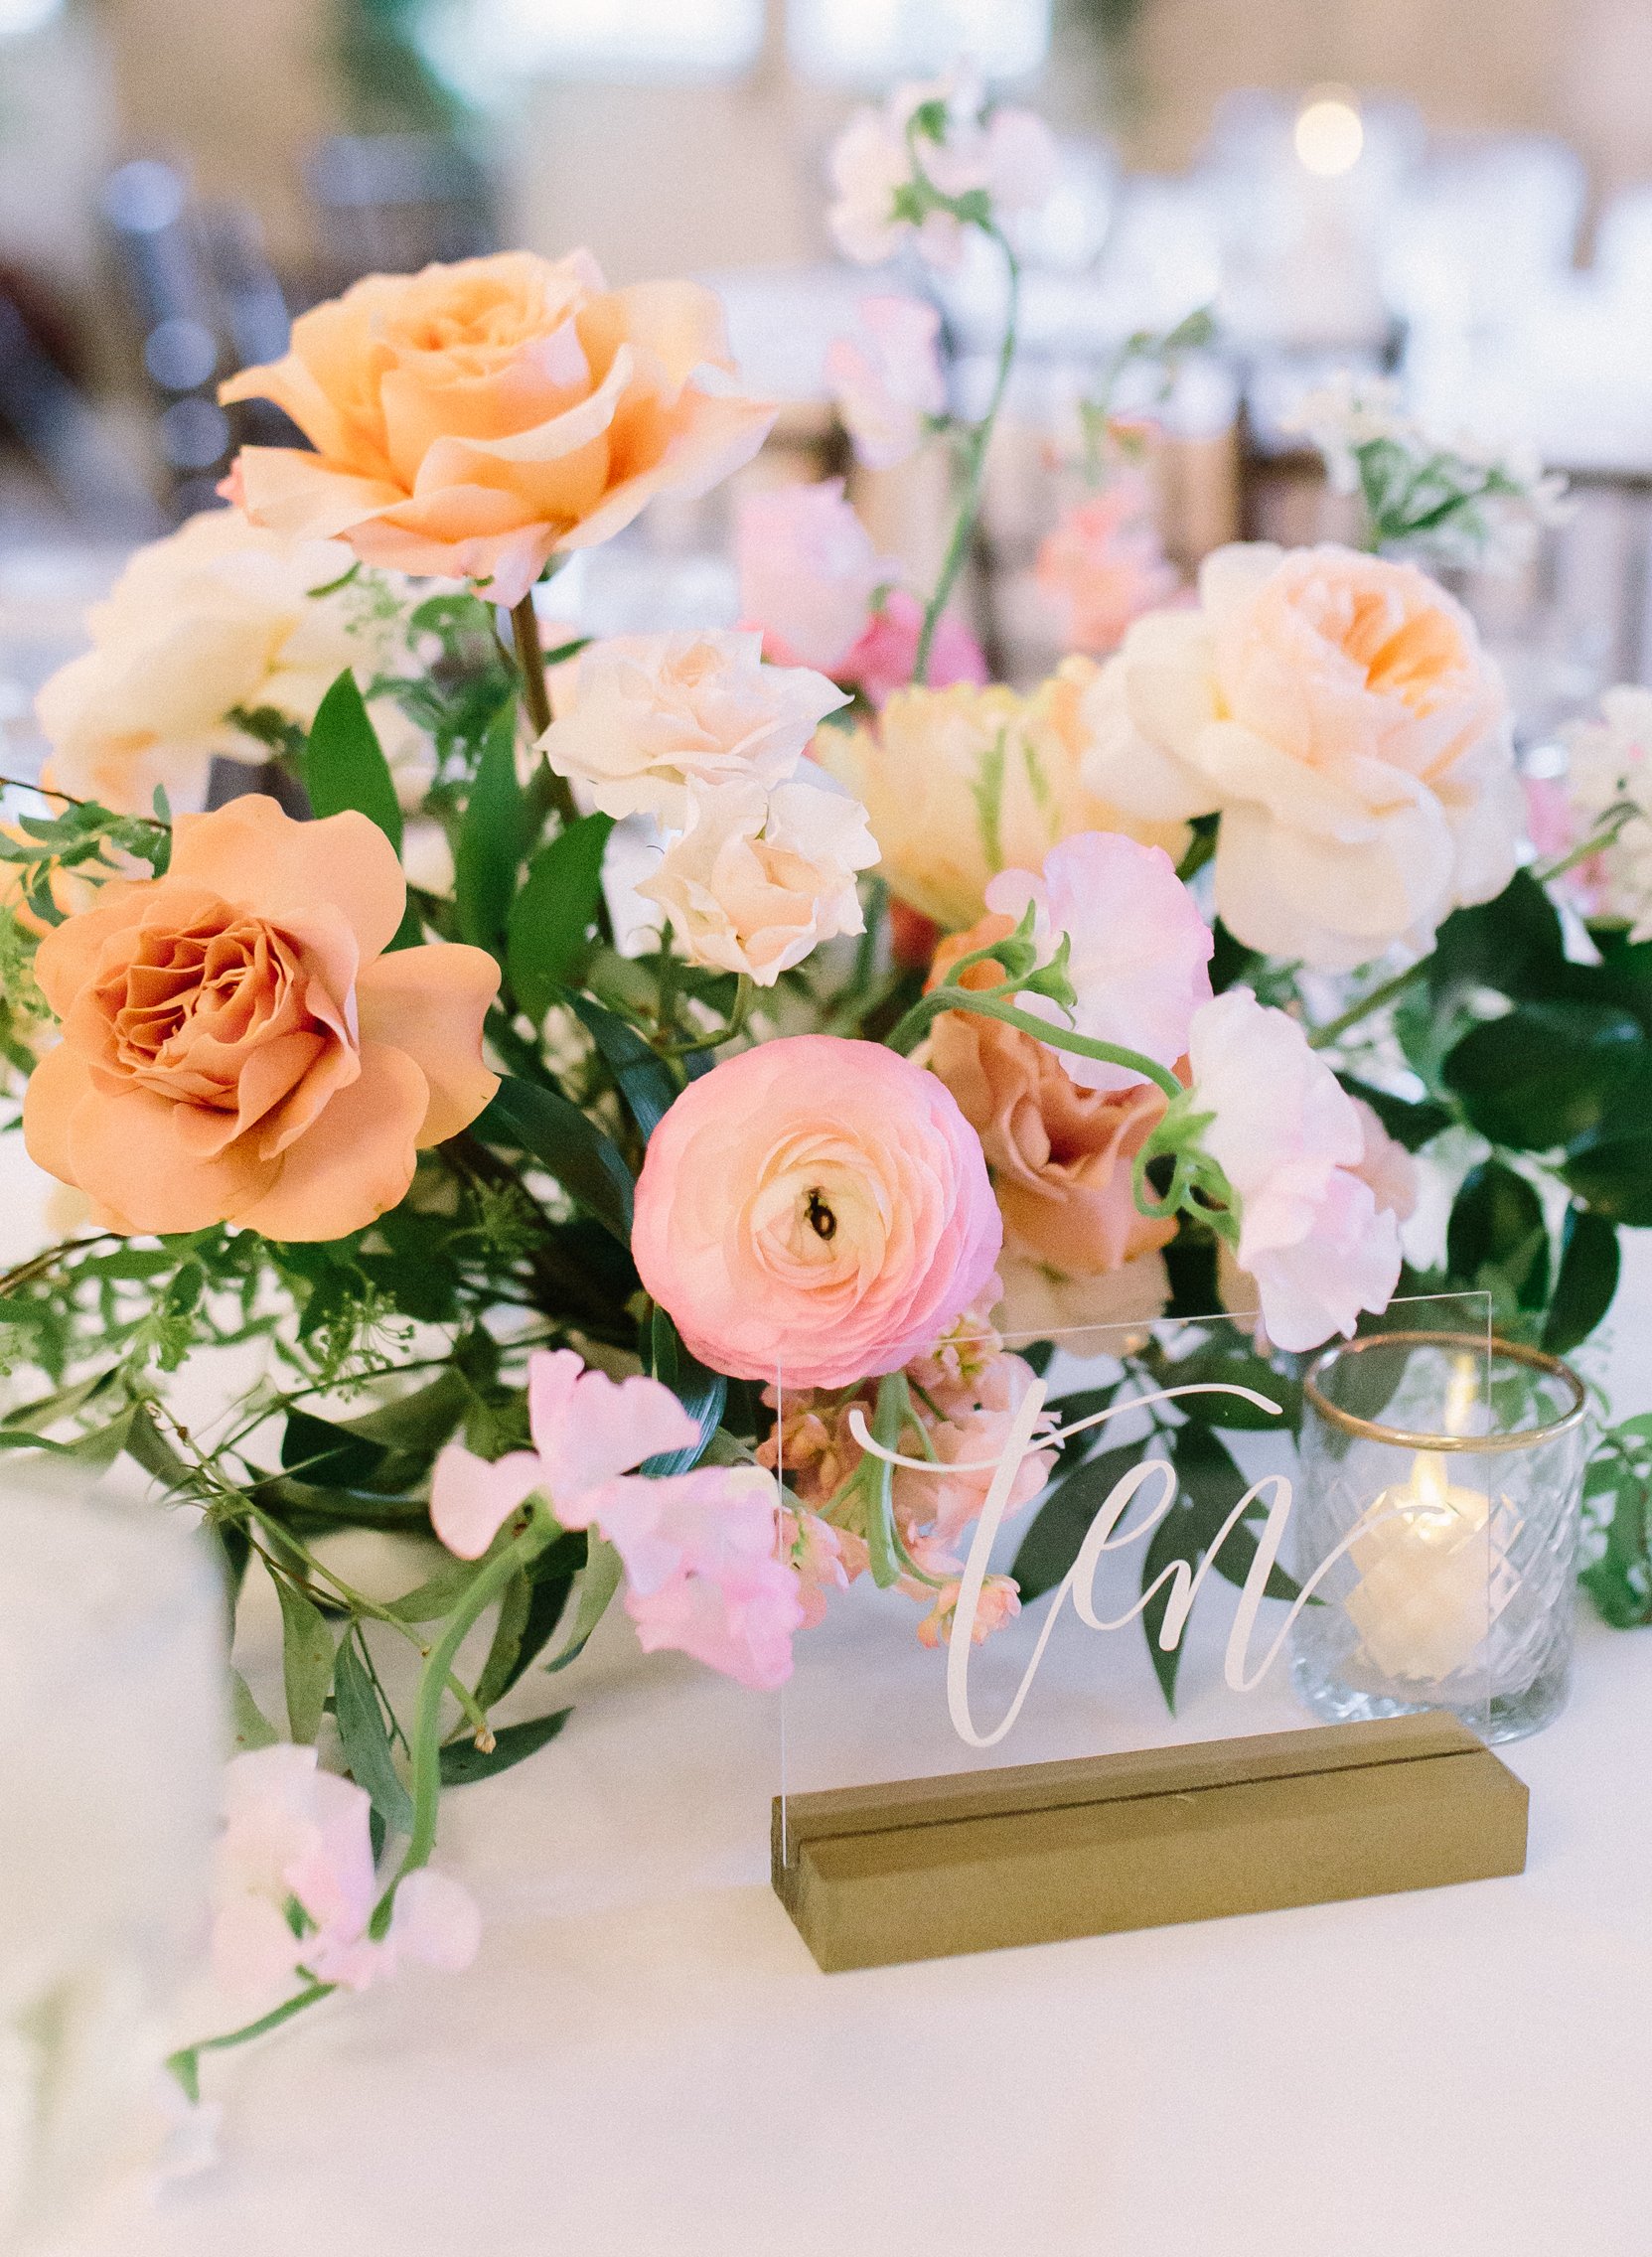 A centerpiece sits on a table for a wedding reception with peach and pink flowers.